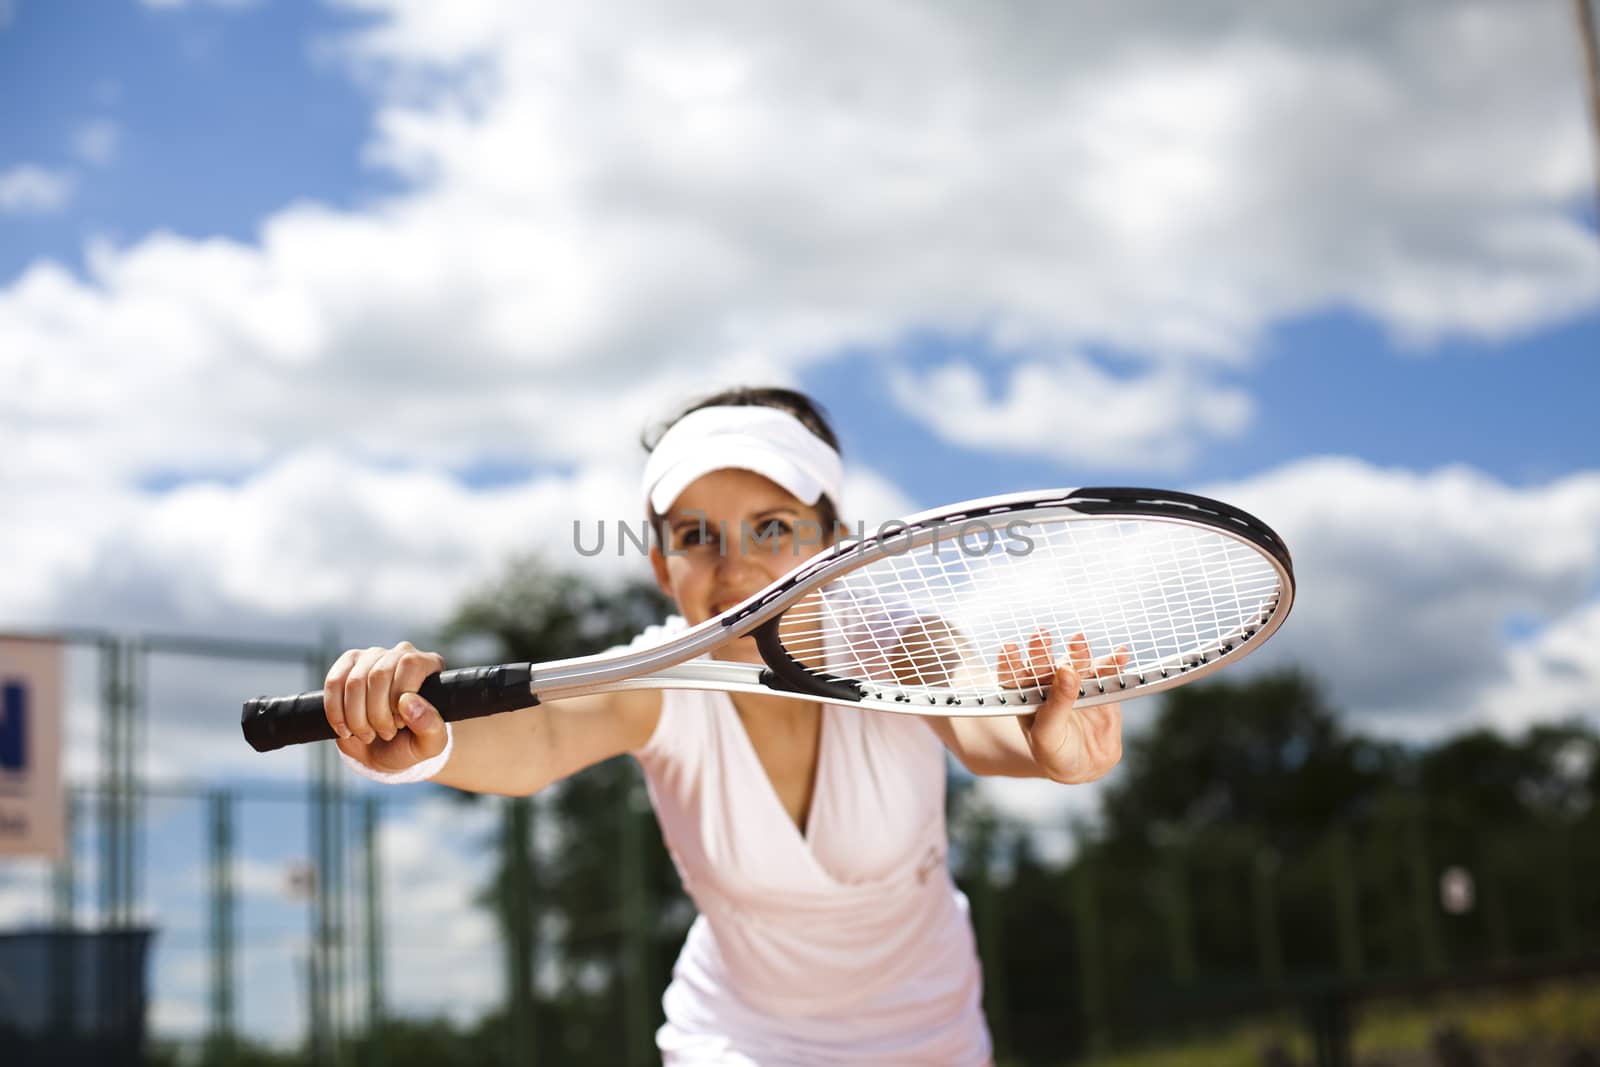 Woman playing tennis in summer